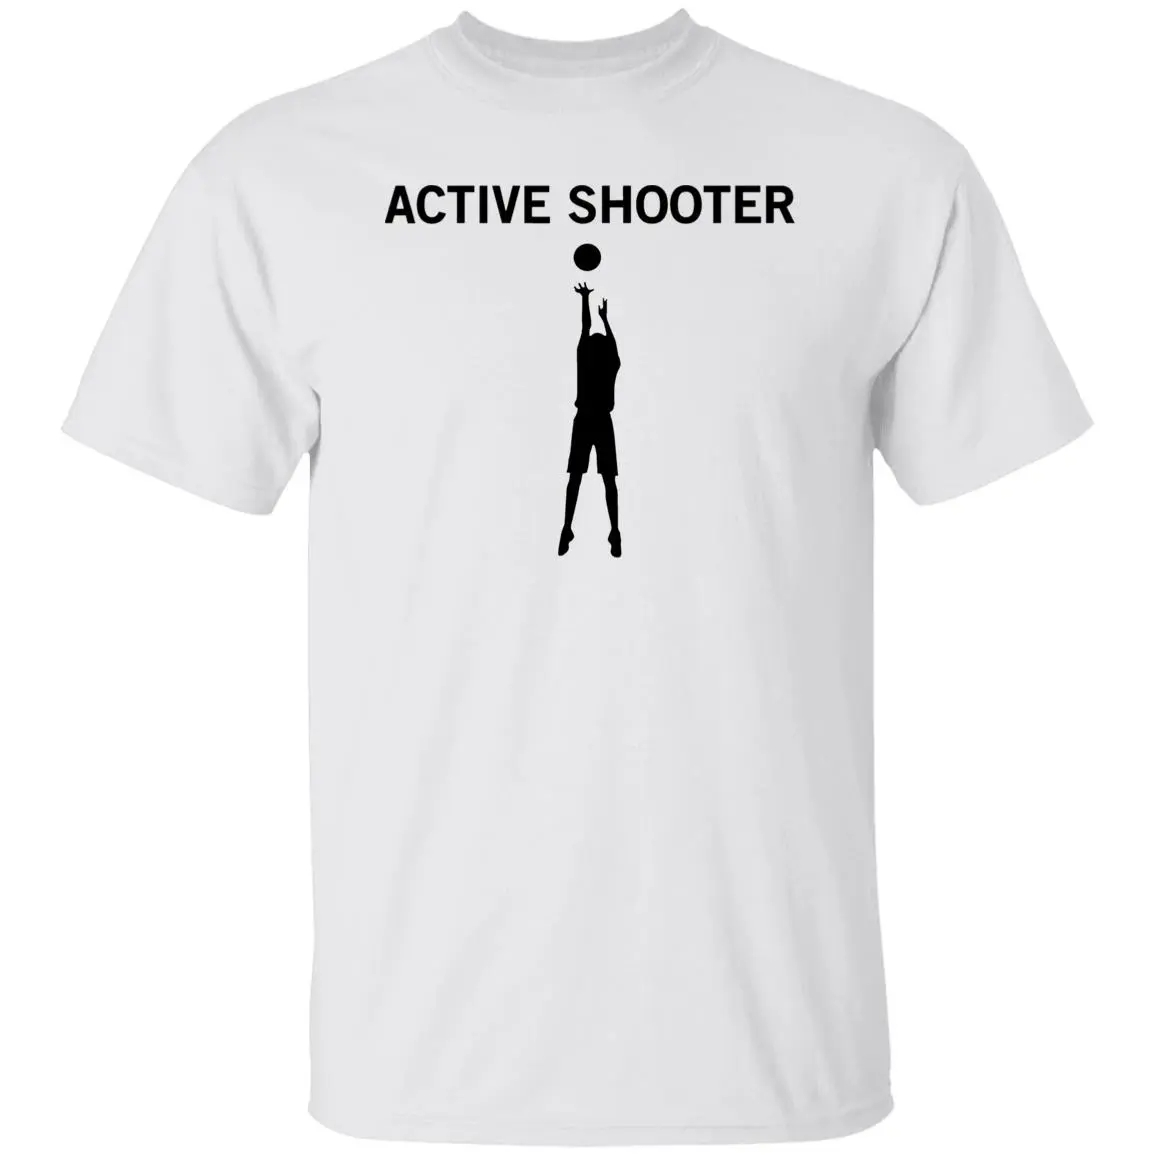 Active shooter t shirt, the intersection of fashion and athleticism has given rise to a dynamic and trend-setting style known as athleisure.